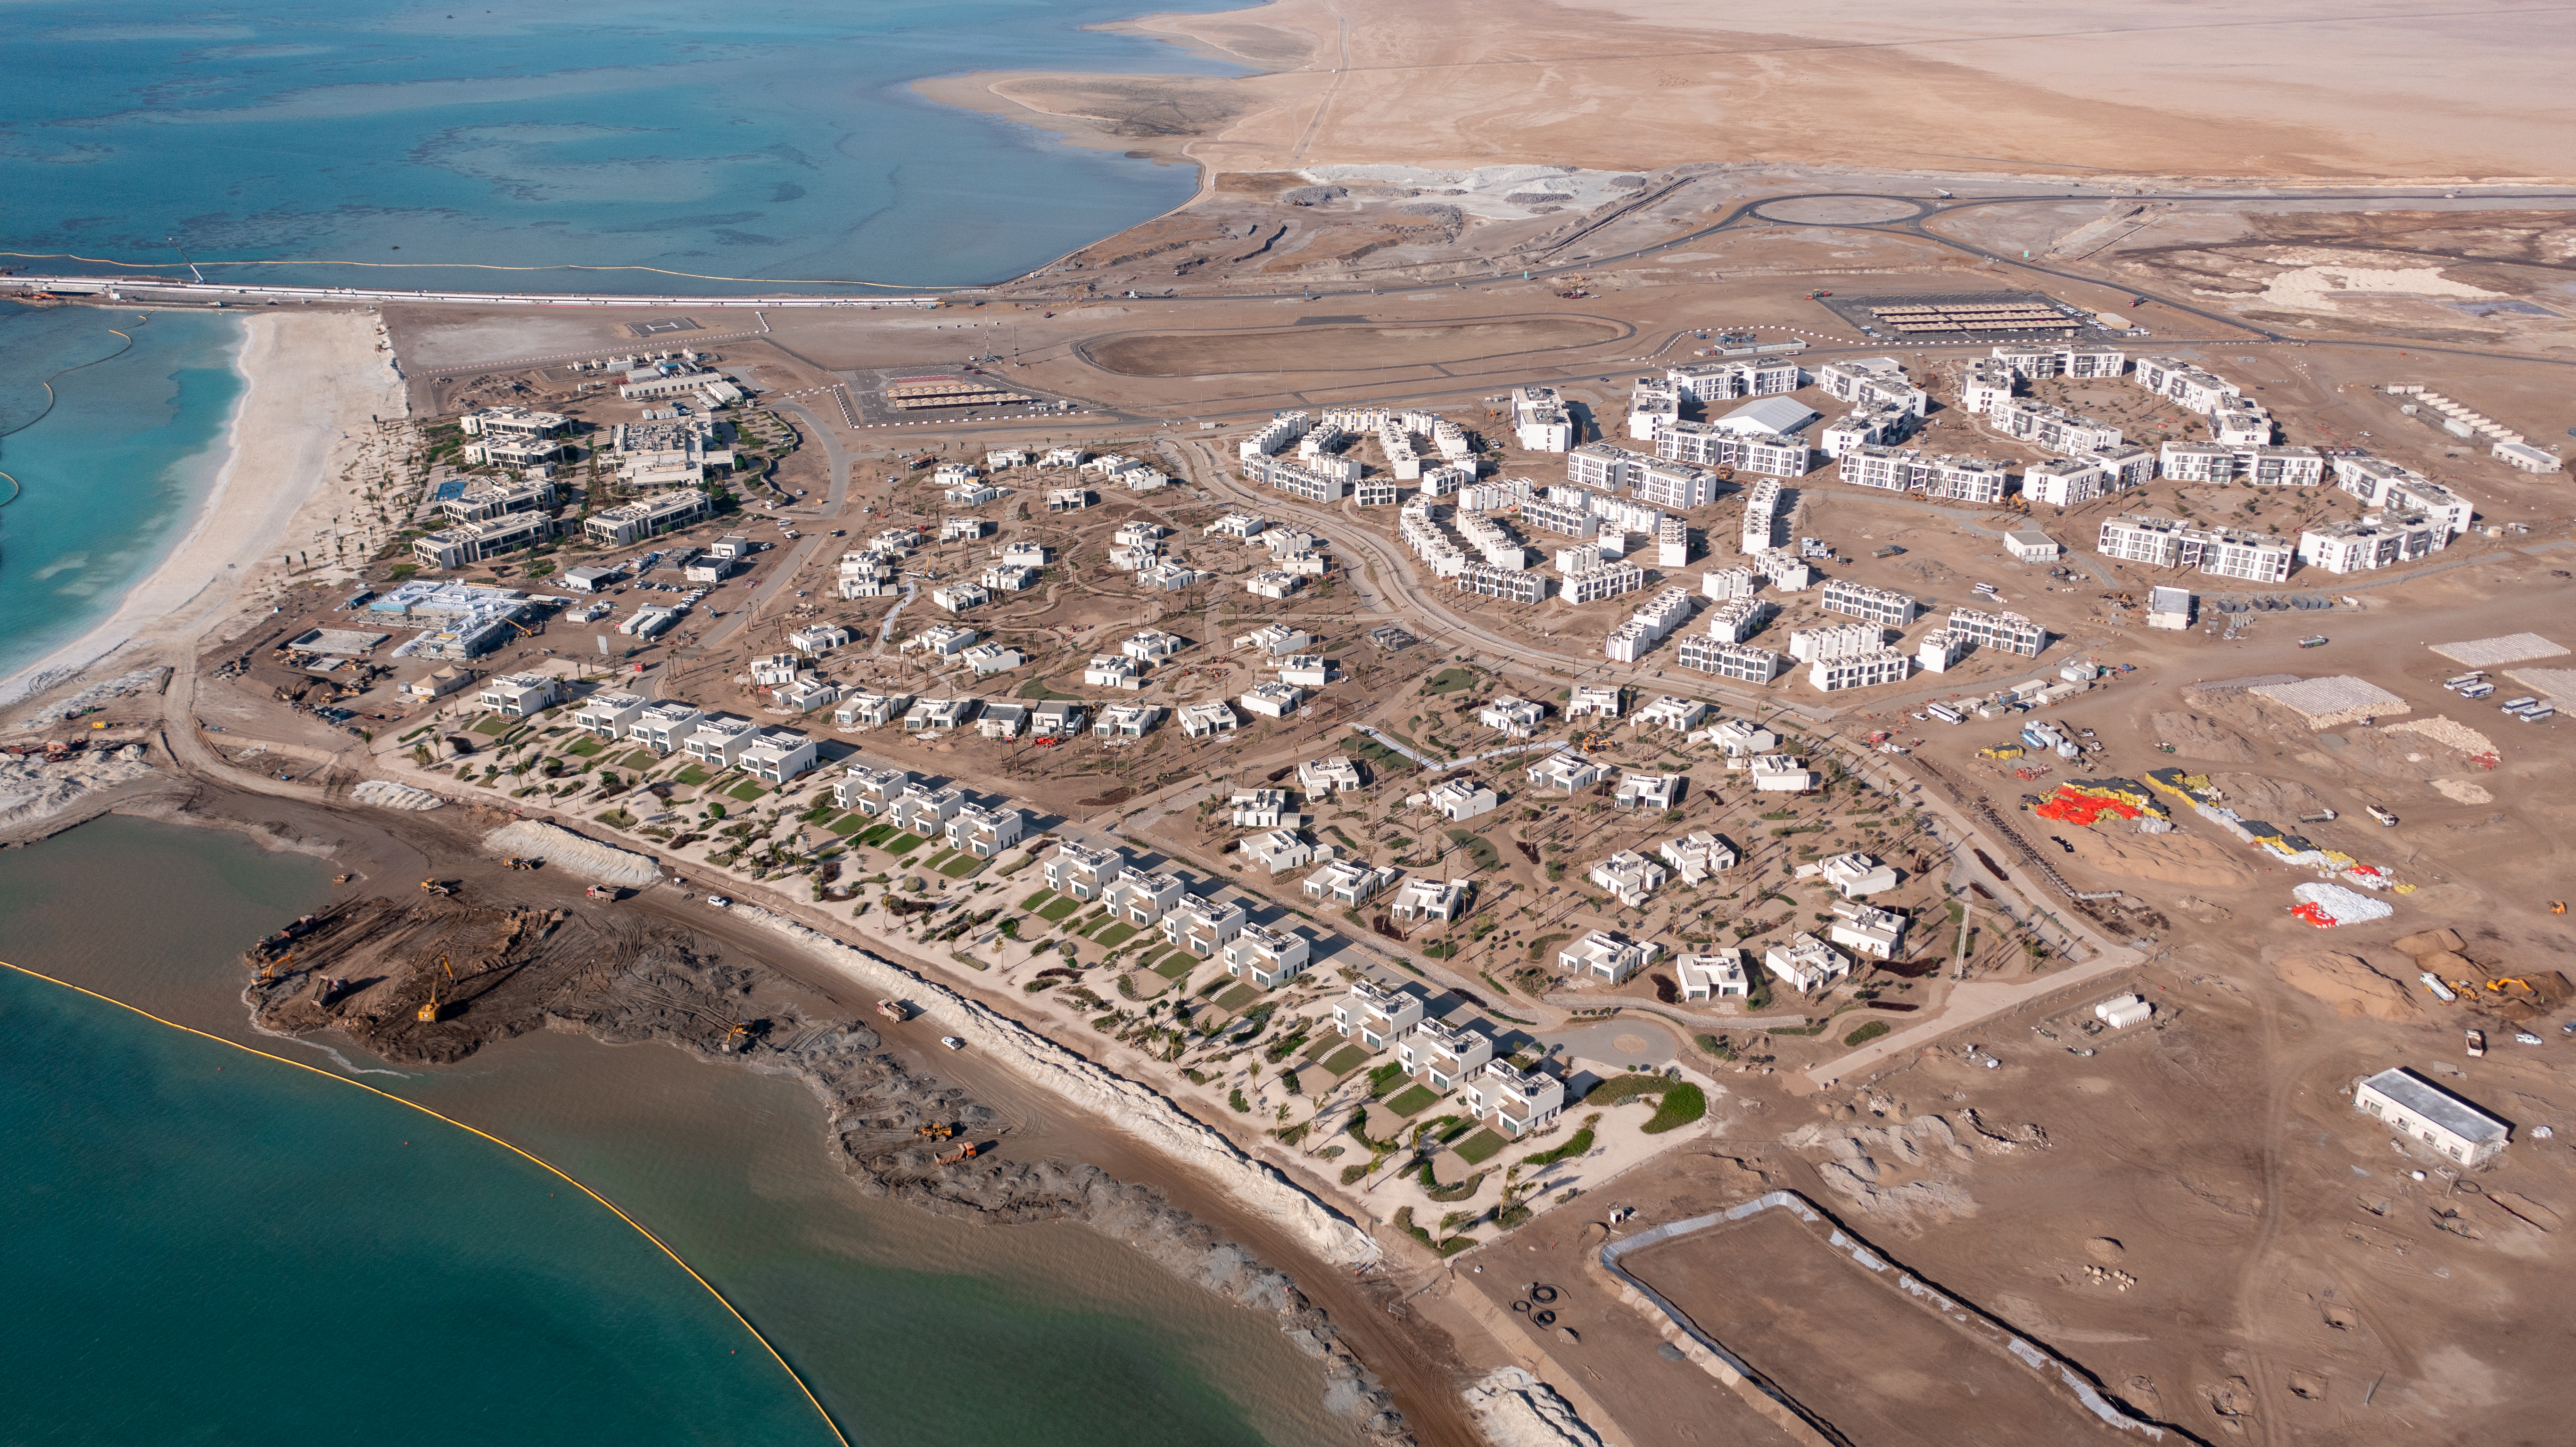 The Red Sea Global begins development of Turtle Bay residential area